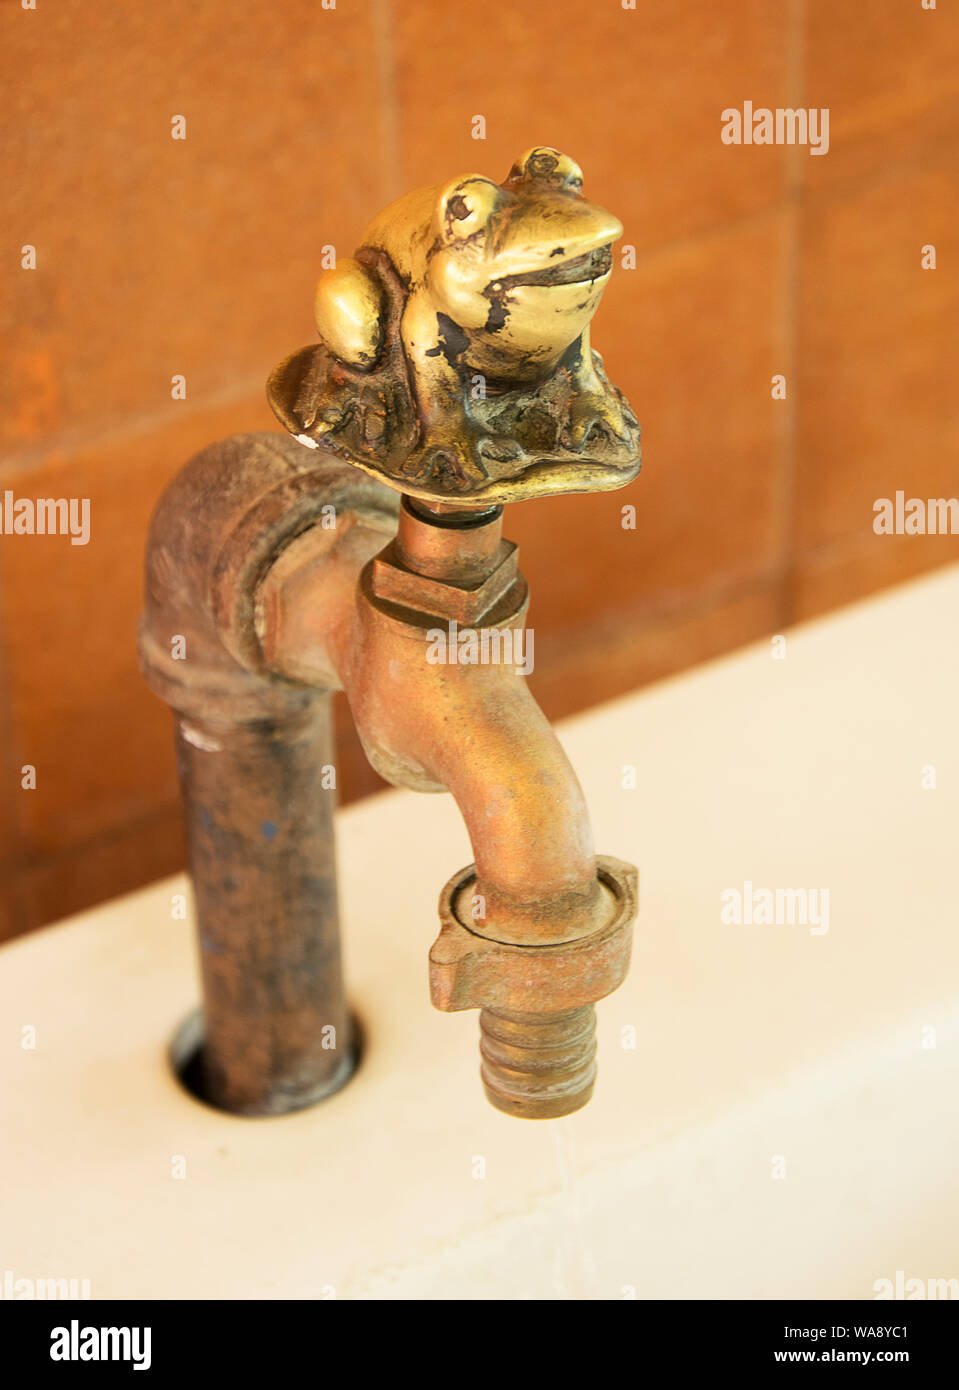 Old style faucet brass frog Stock Photo